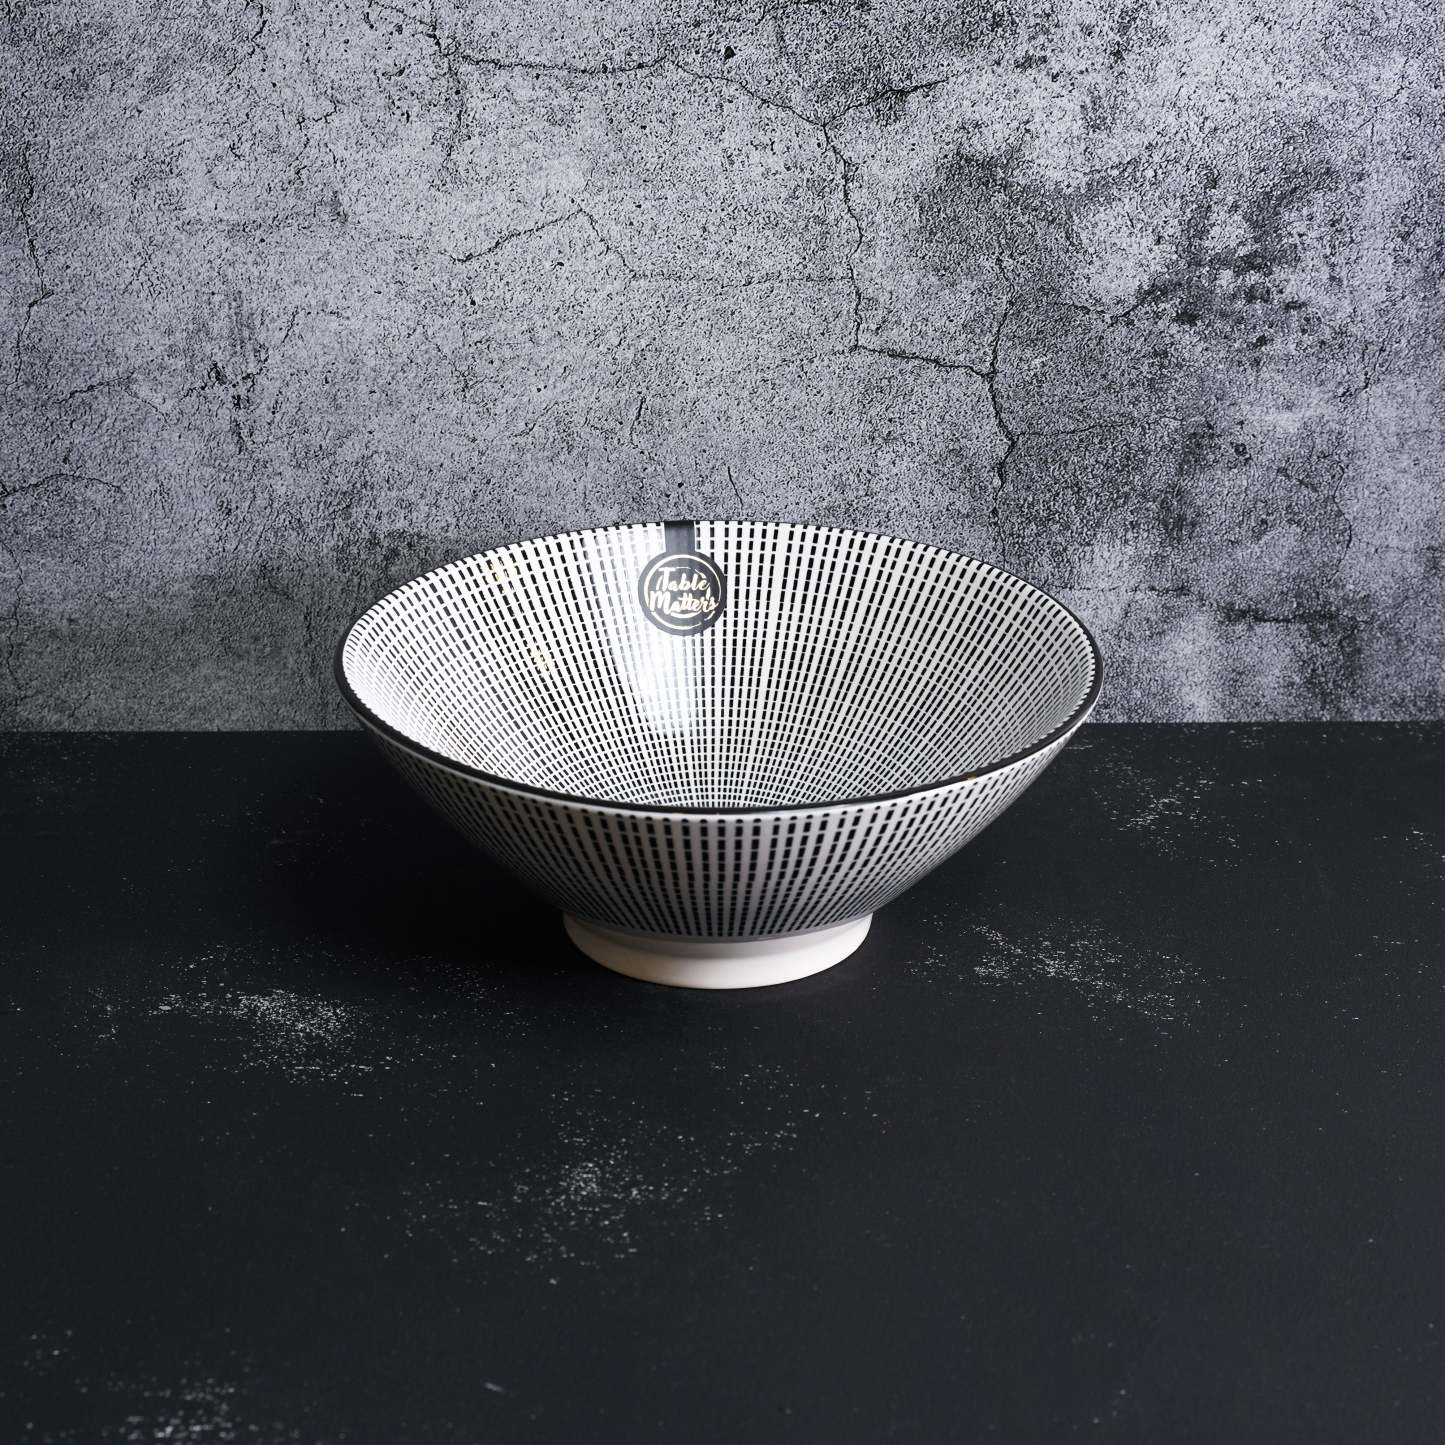 Scattered Lines - 7 inch / 9 inch Ramen Bowl